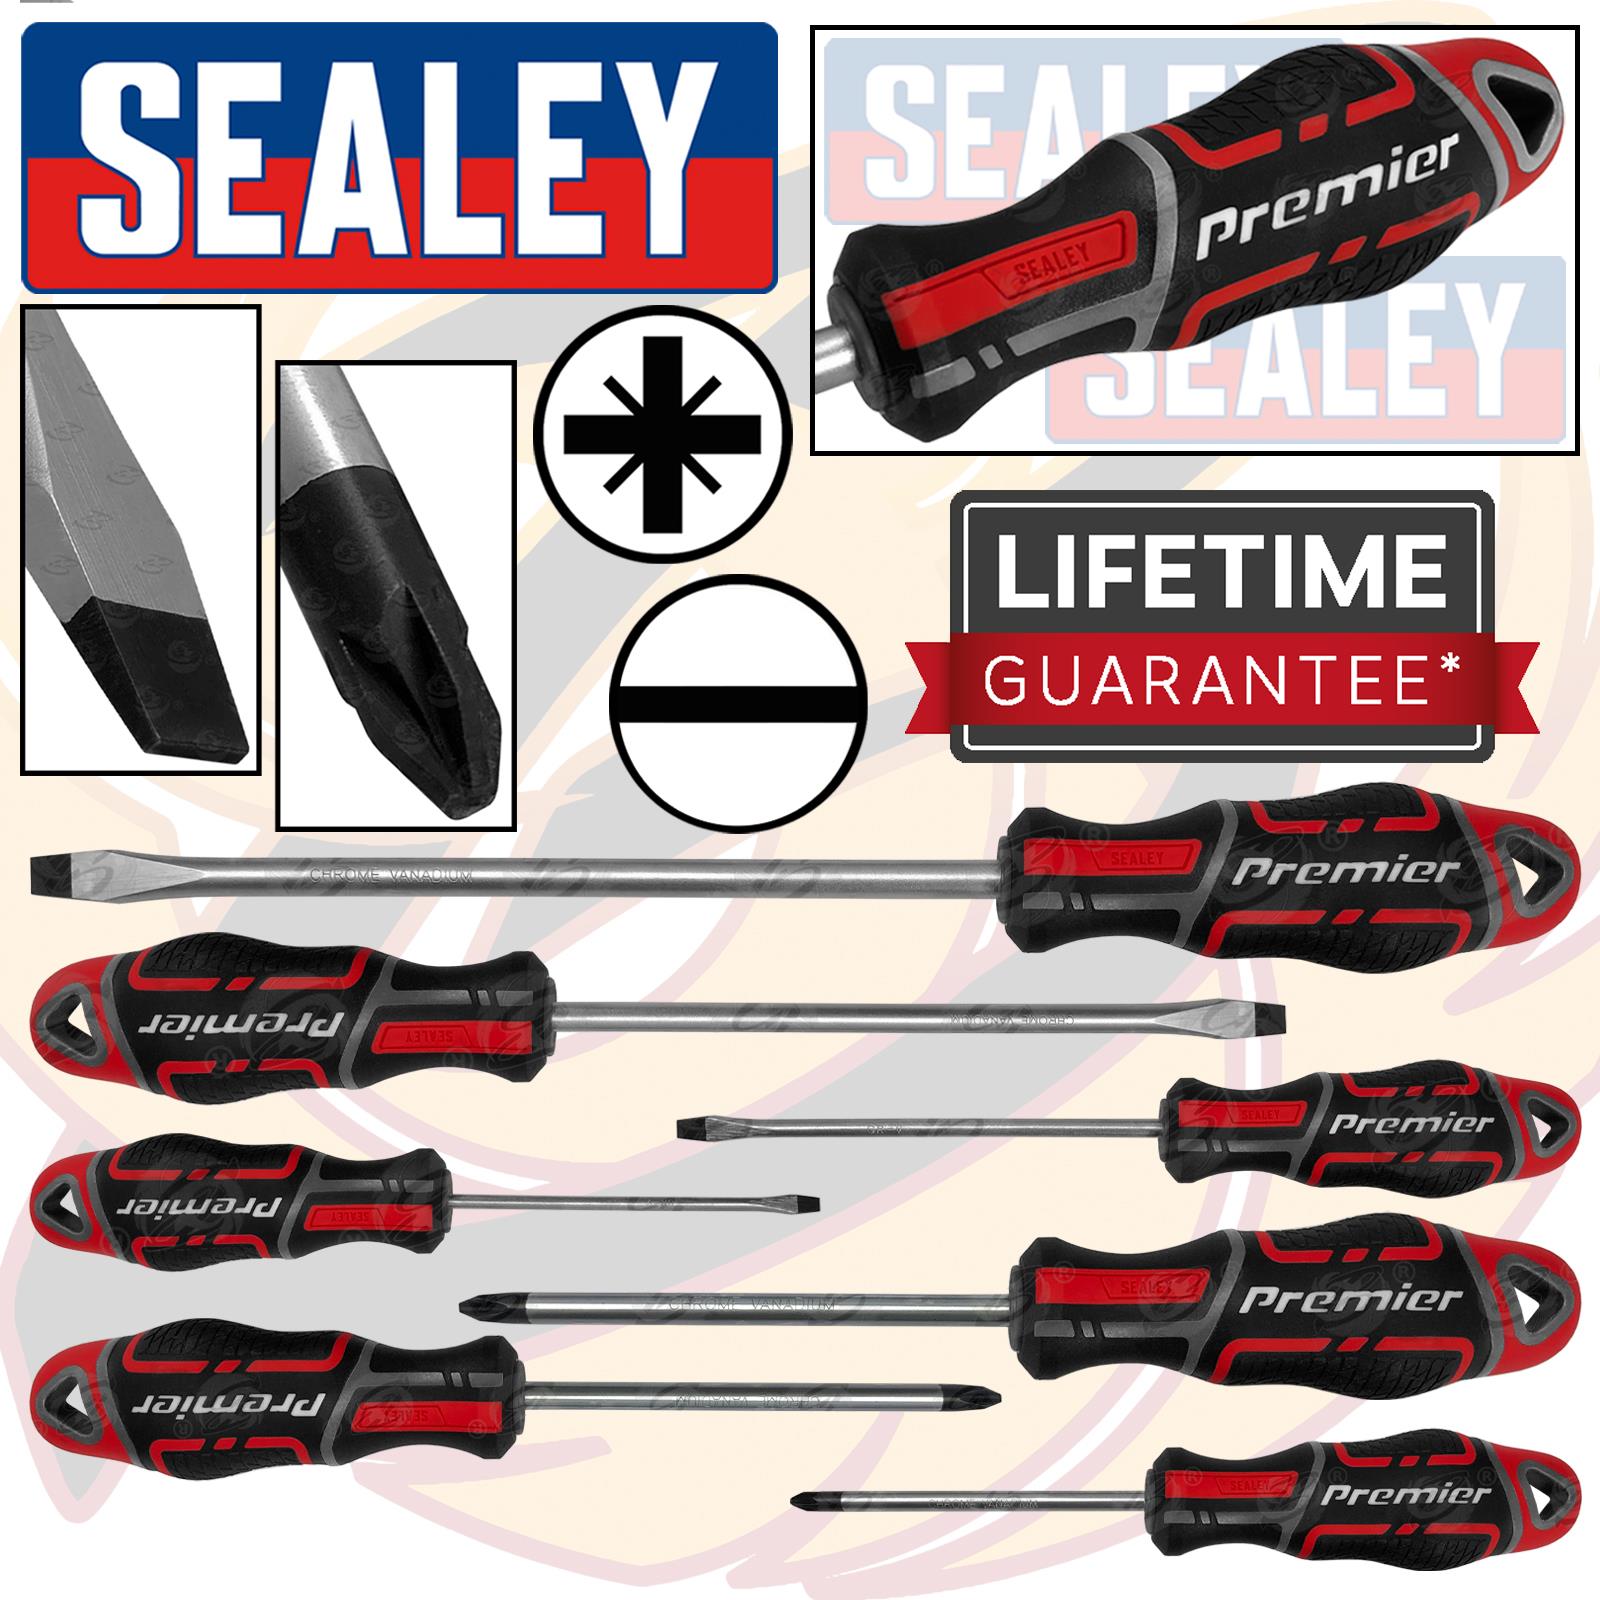 SEALEY 7PCS MAGNETIC SCREWDRIVERS ( SLOTTED - POZIDRIVE ) ( RED )